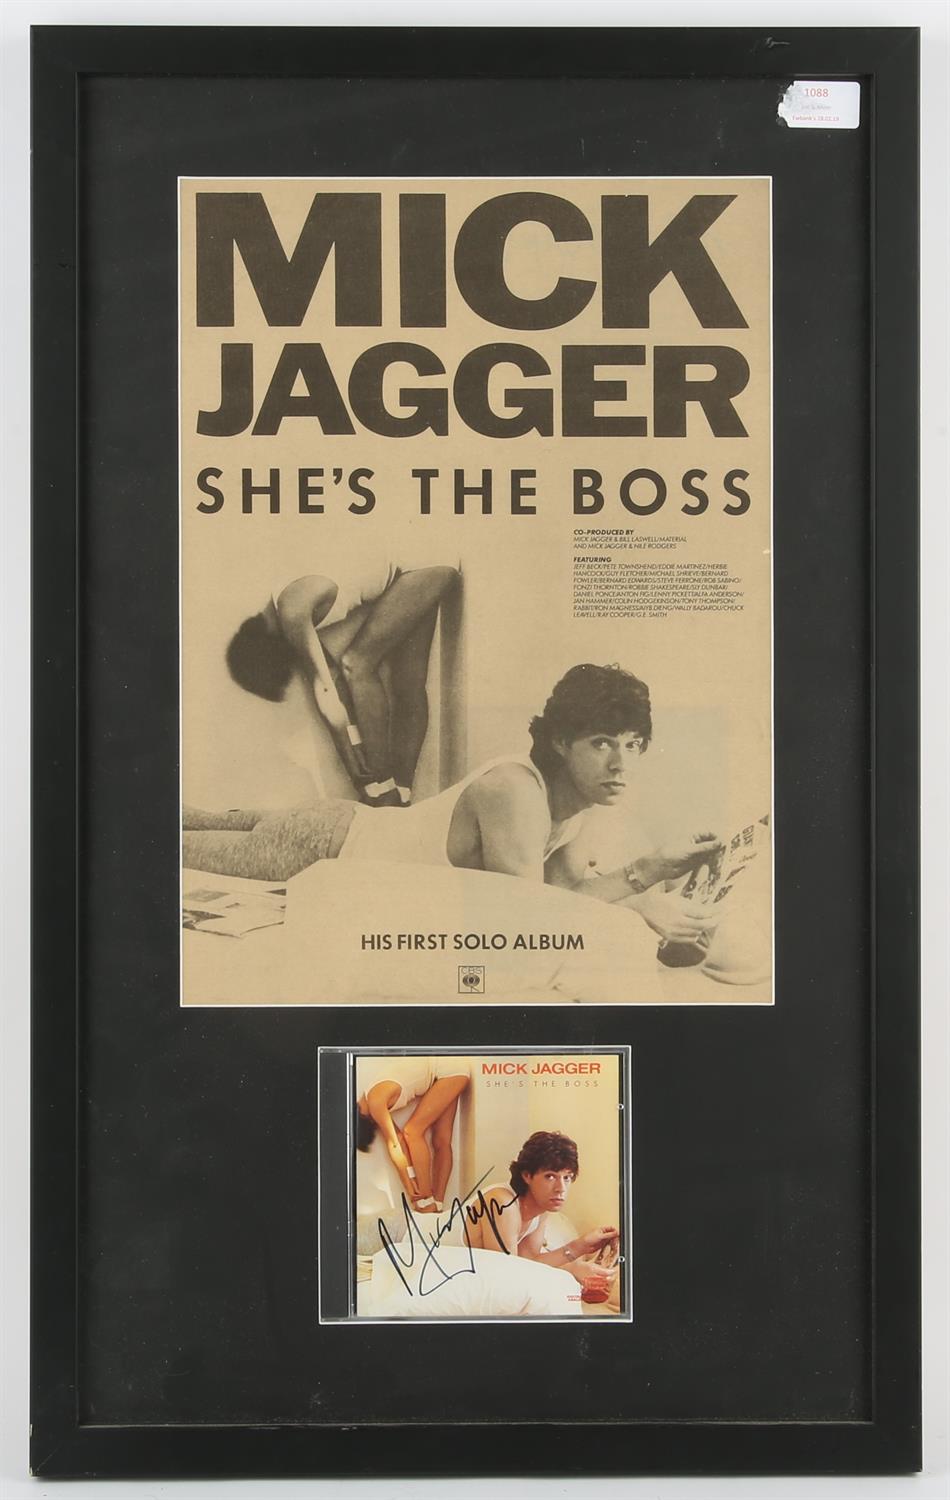 Mick Jagger - Autograph on CD of the album 'She's The Boss', mounted with an original advert of his